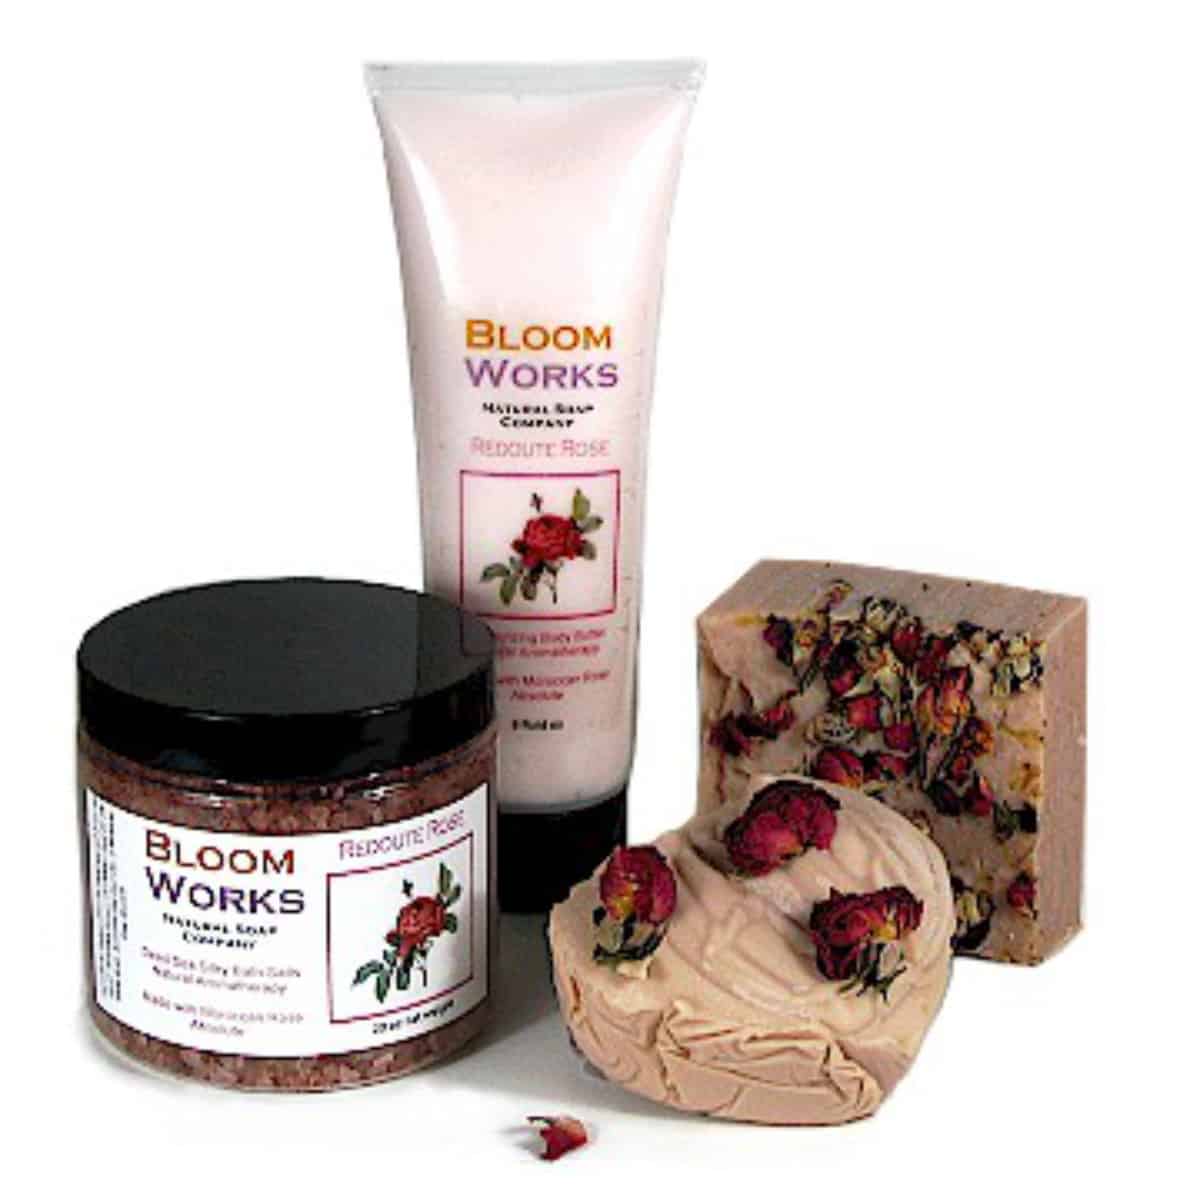 rose attar cold process soap with rose petals on top with matching bath salts and lotion.